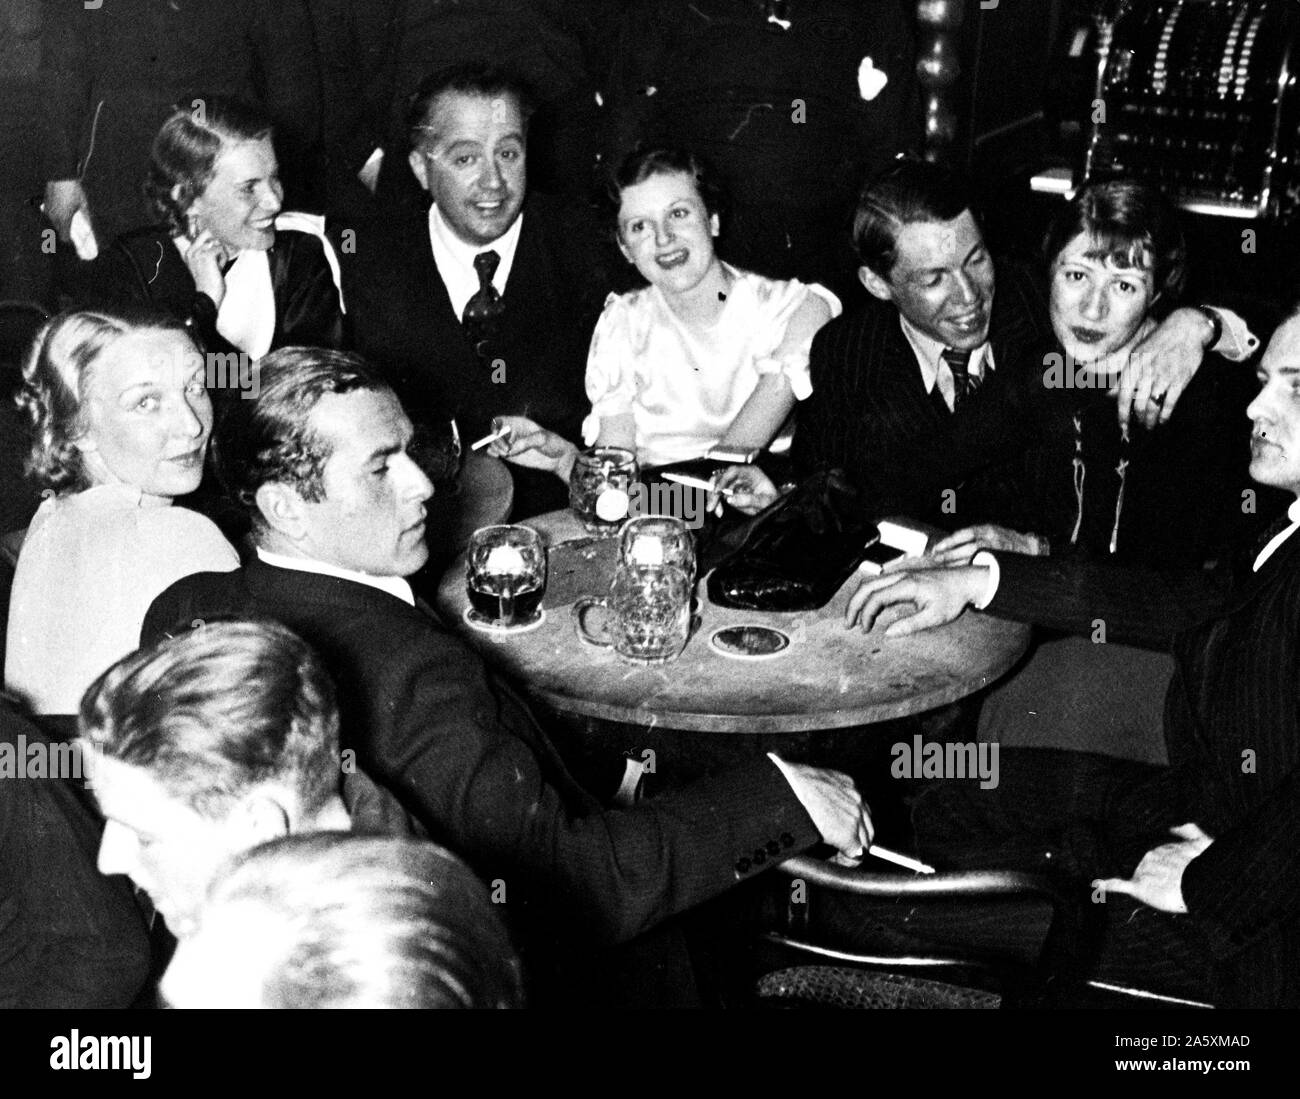 Eva Braun Photo Collection - Album 1 - German men and women out for an evening in fun at a club ca. 1930s Germany Stock Photo